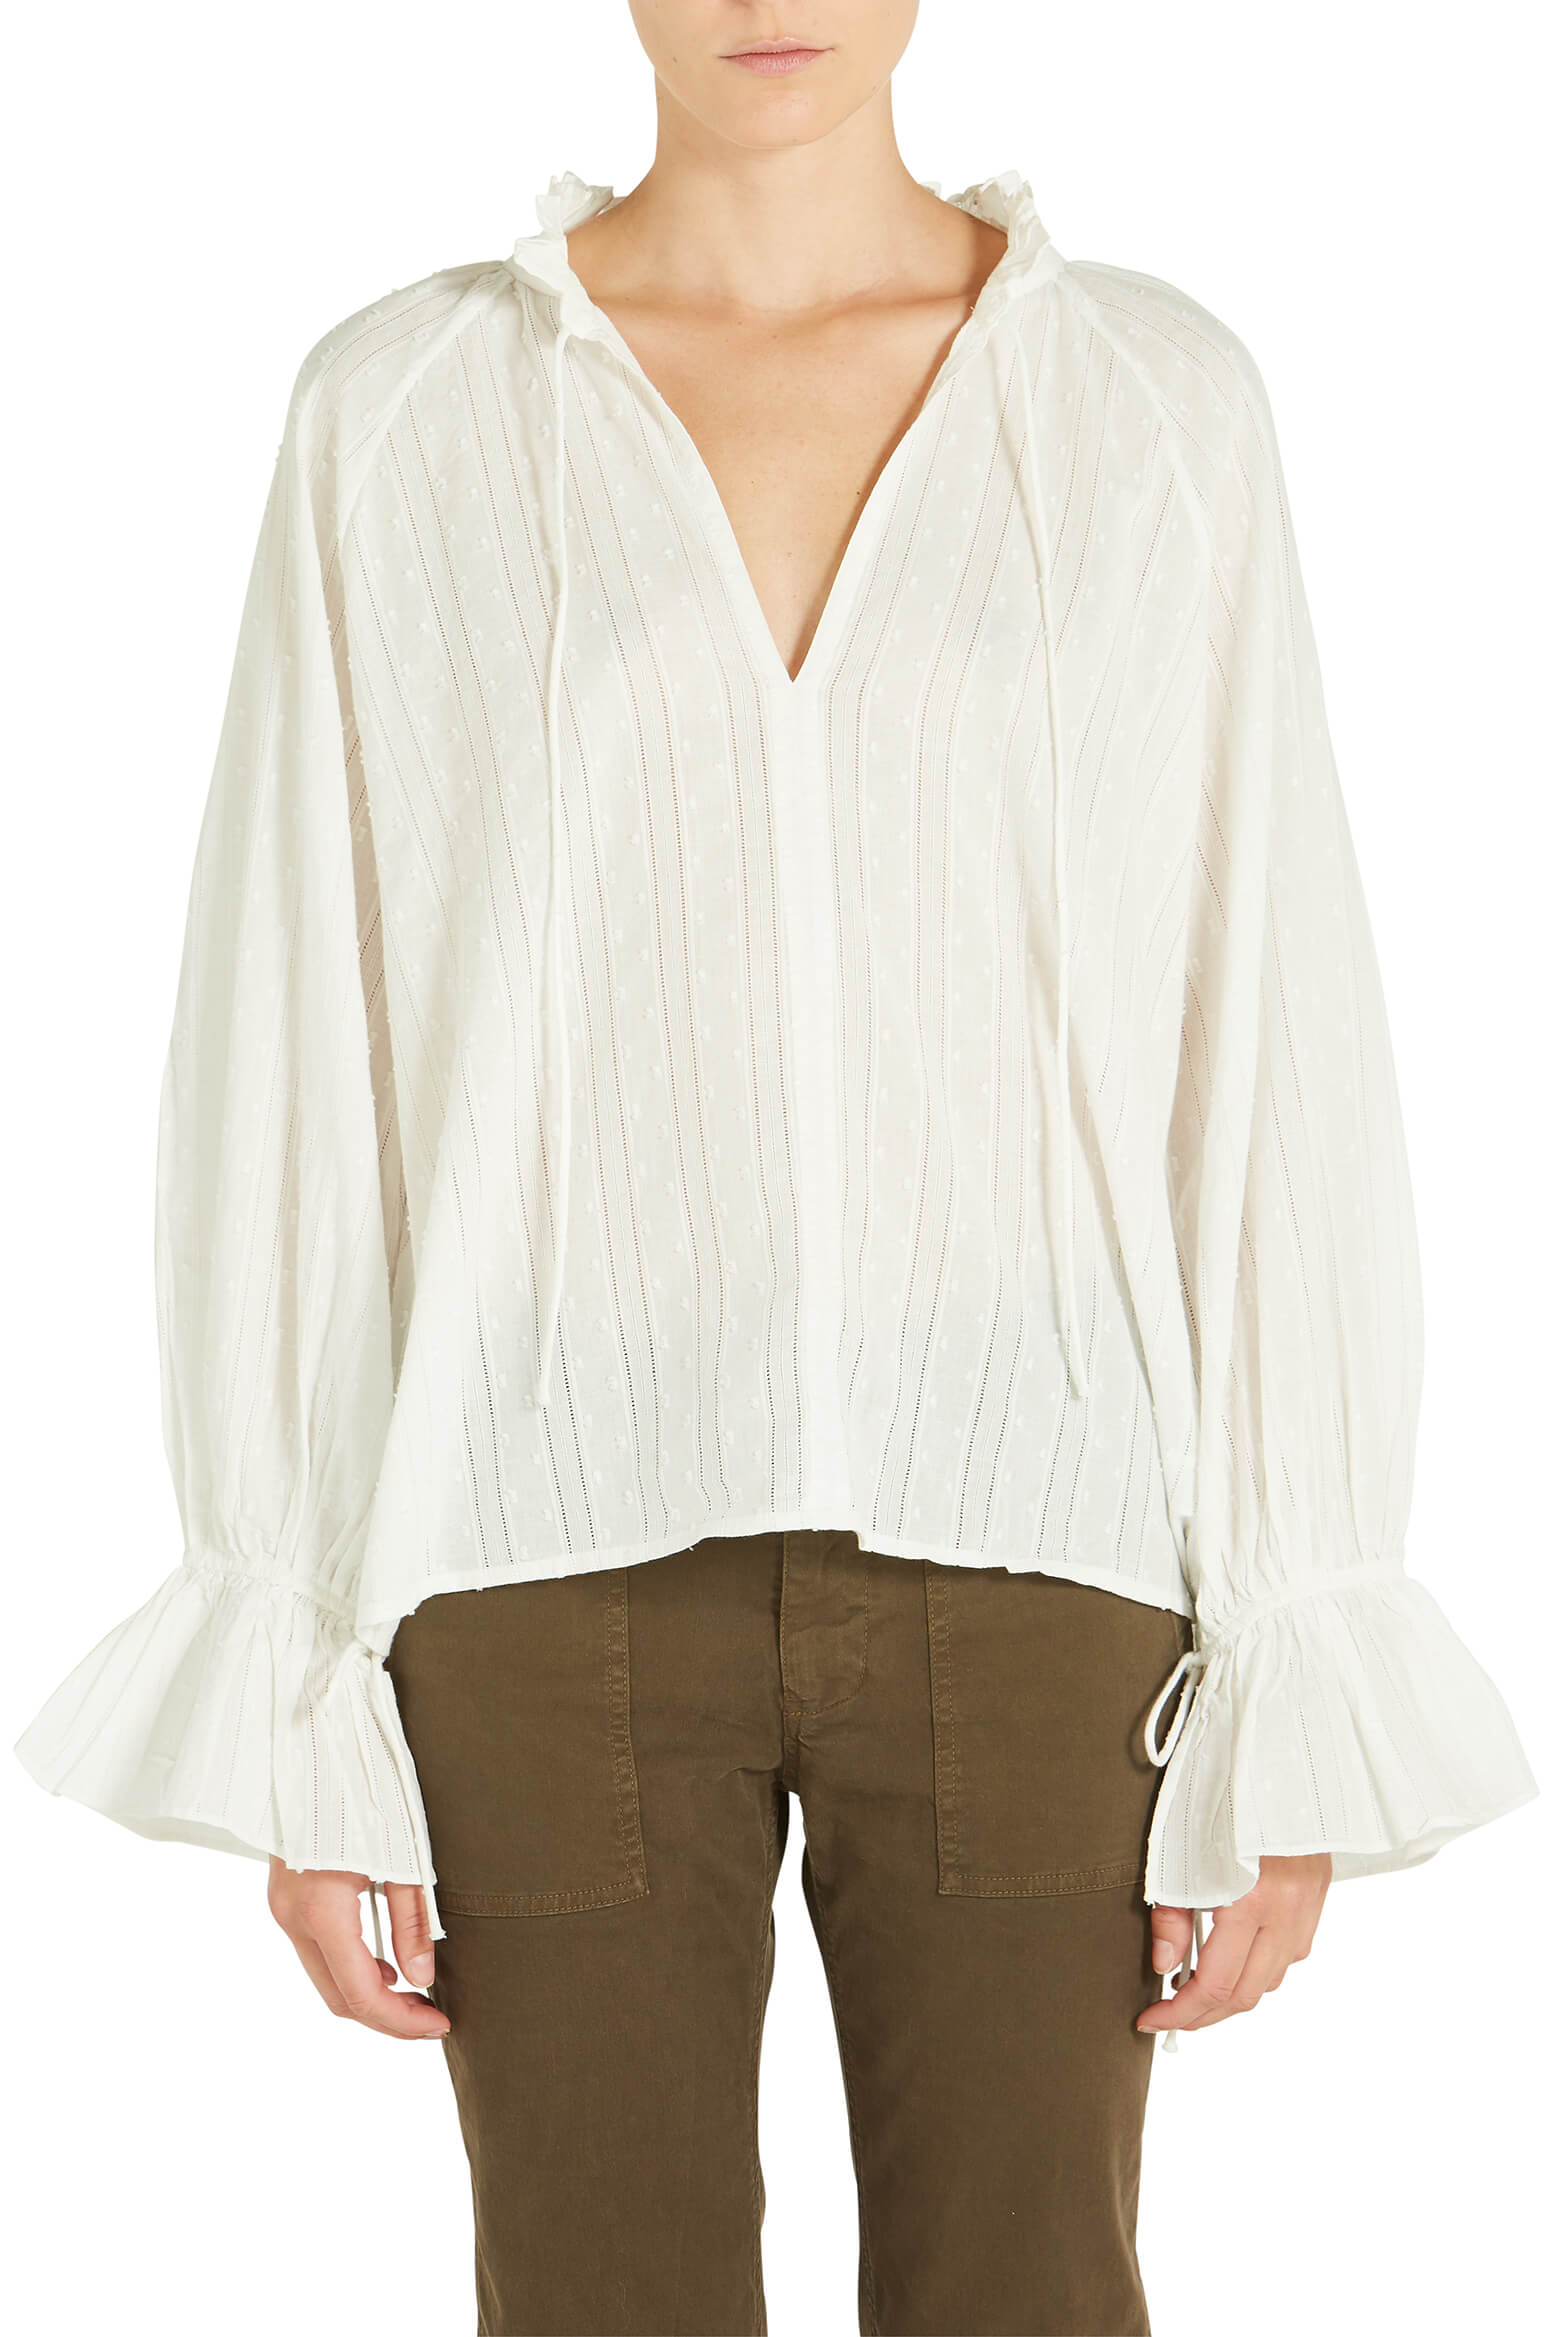 Nili Lotan Thelina Top in Ivory from The New Trend